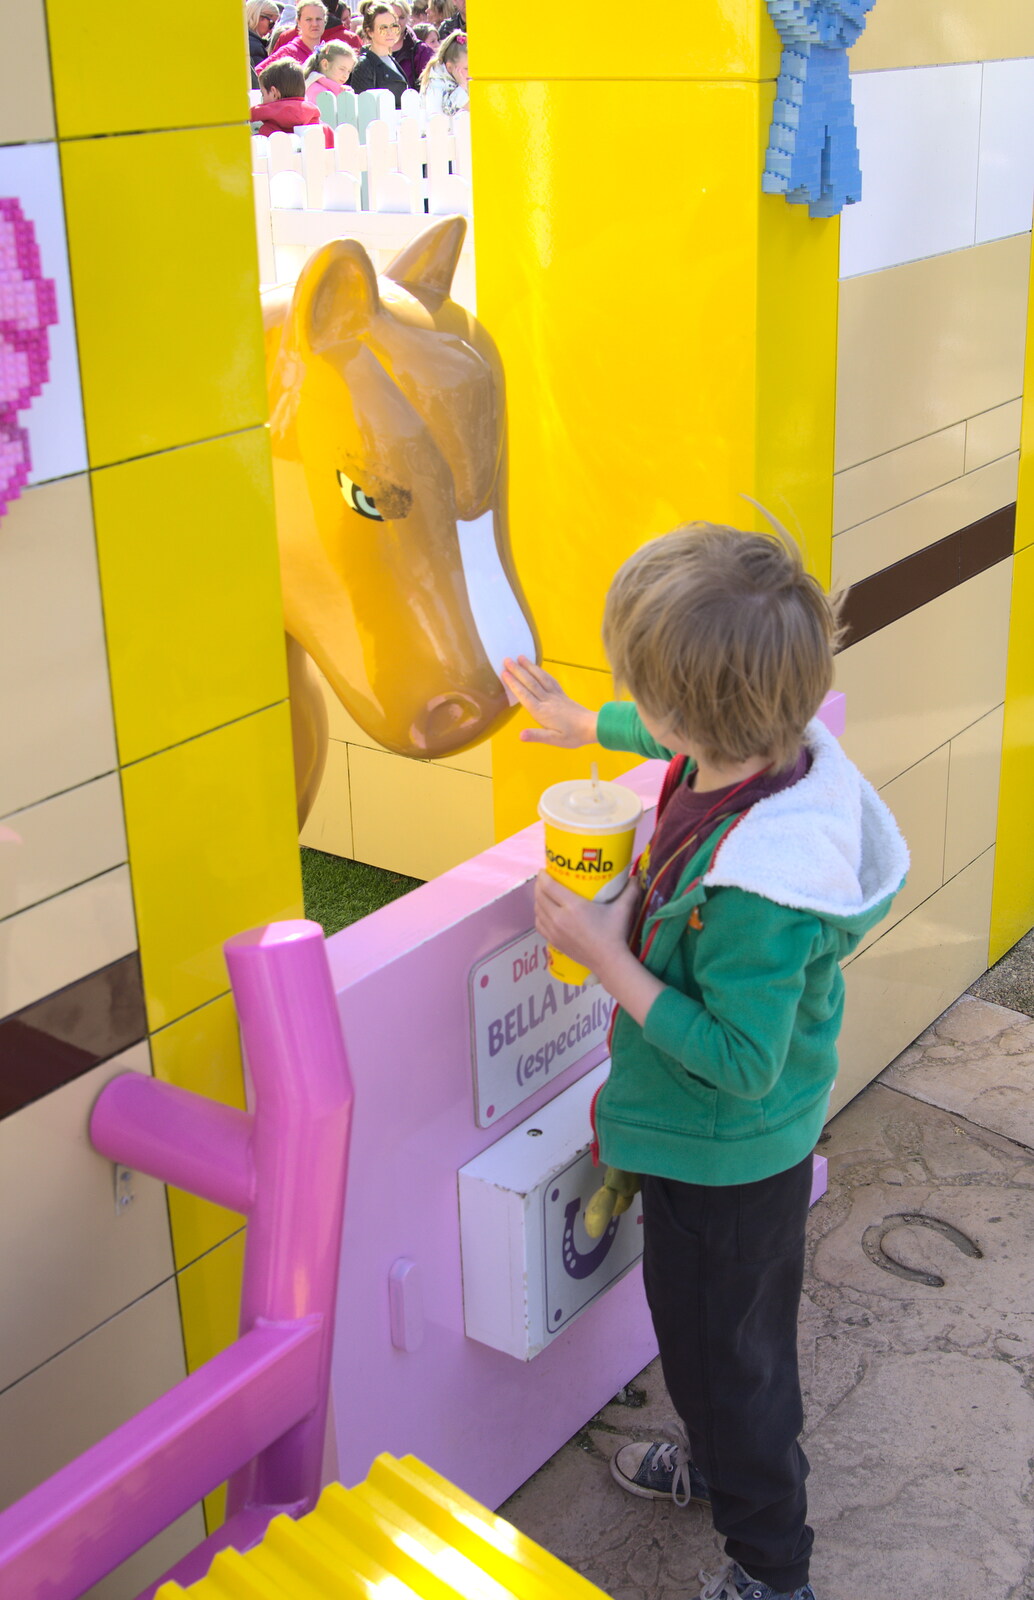 Harry pokes a massive Lego horse from A Trip to Legoland, Windsor, Berkshire - 25th March 2017